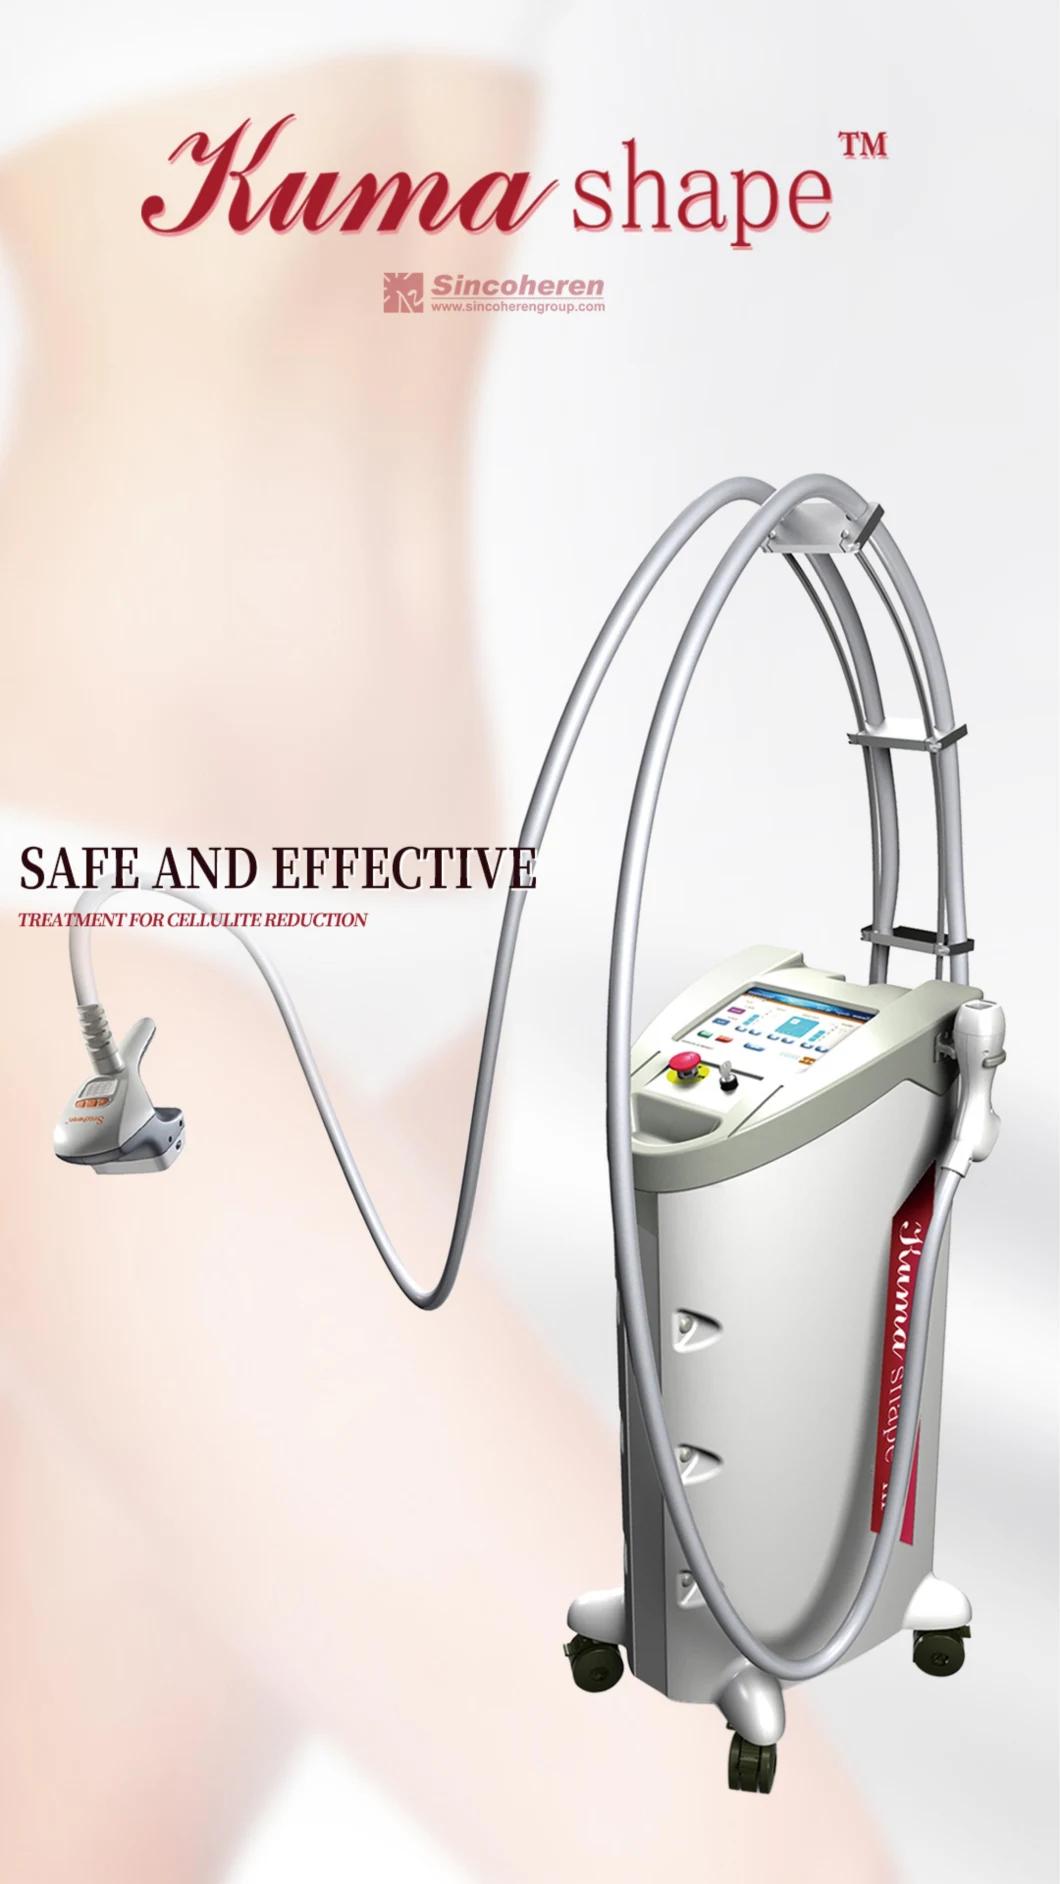 Slimming Cavitation Machine with CE Certificate Approved Vacuum+RF+Infrared+Massage Roller for Cellulite Removal Body Shaping Skin Tightening Machine (M)